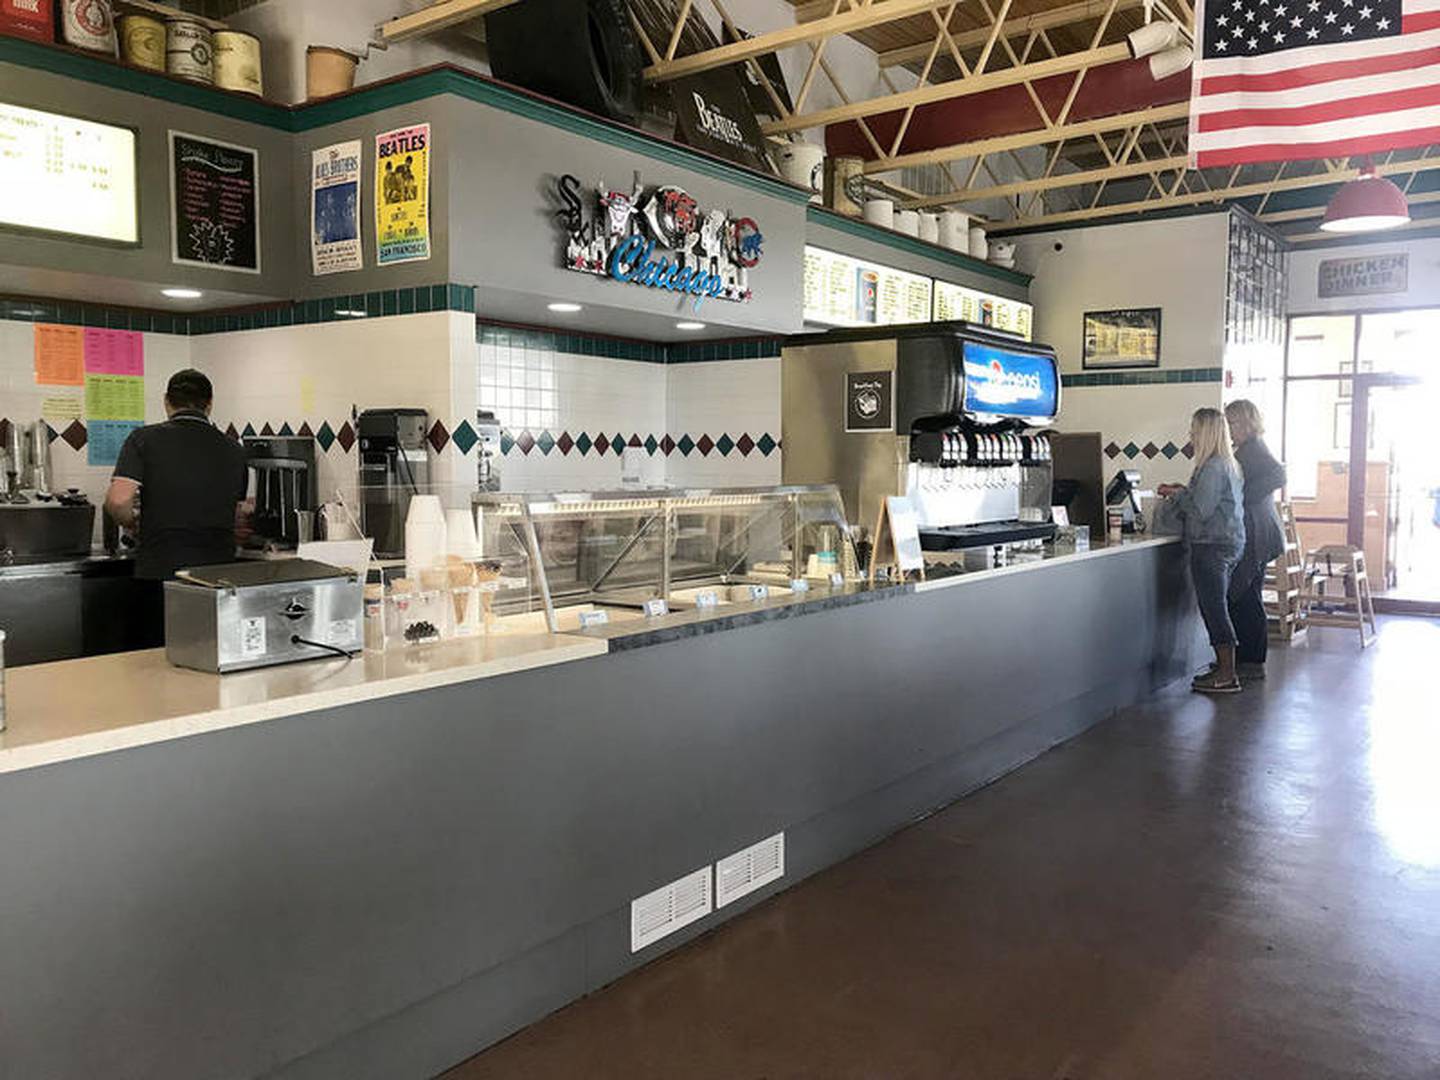 The register area at Johnny K's in Sandwich is divided up into two areas, one for regular meals, and one for ice creams and desserts.